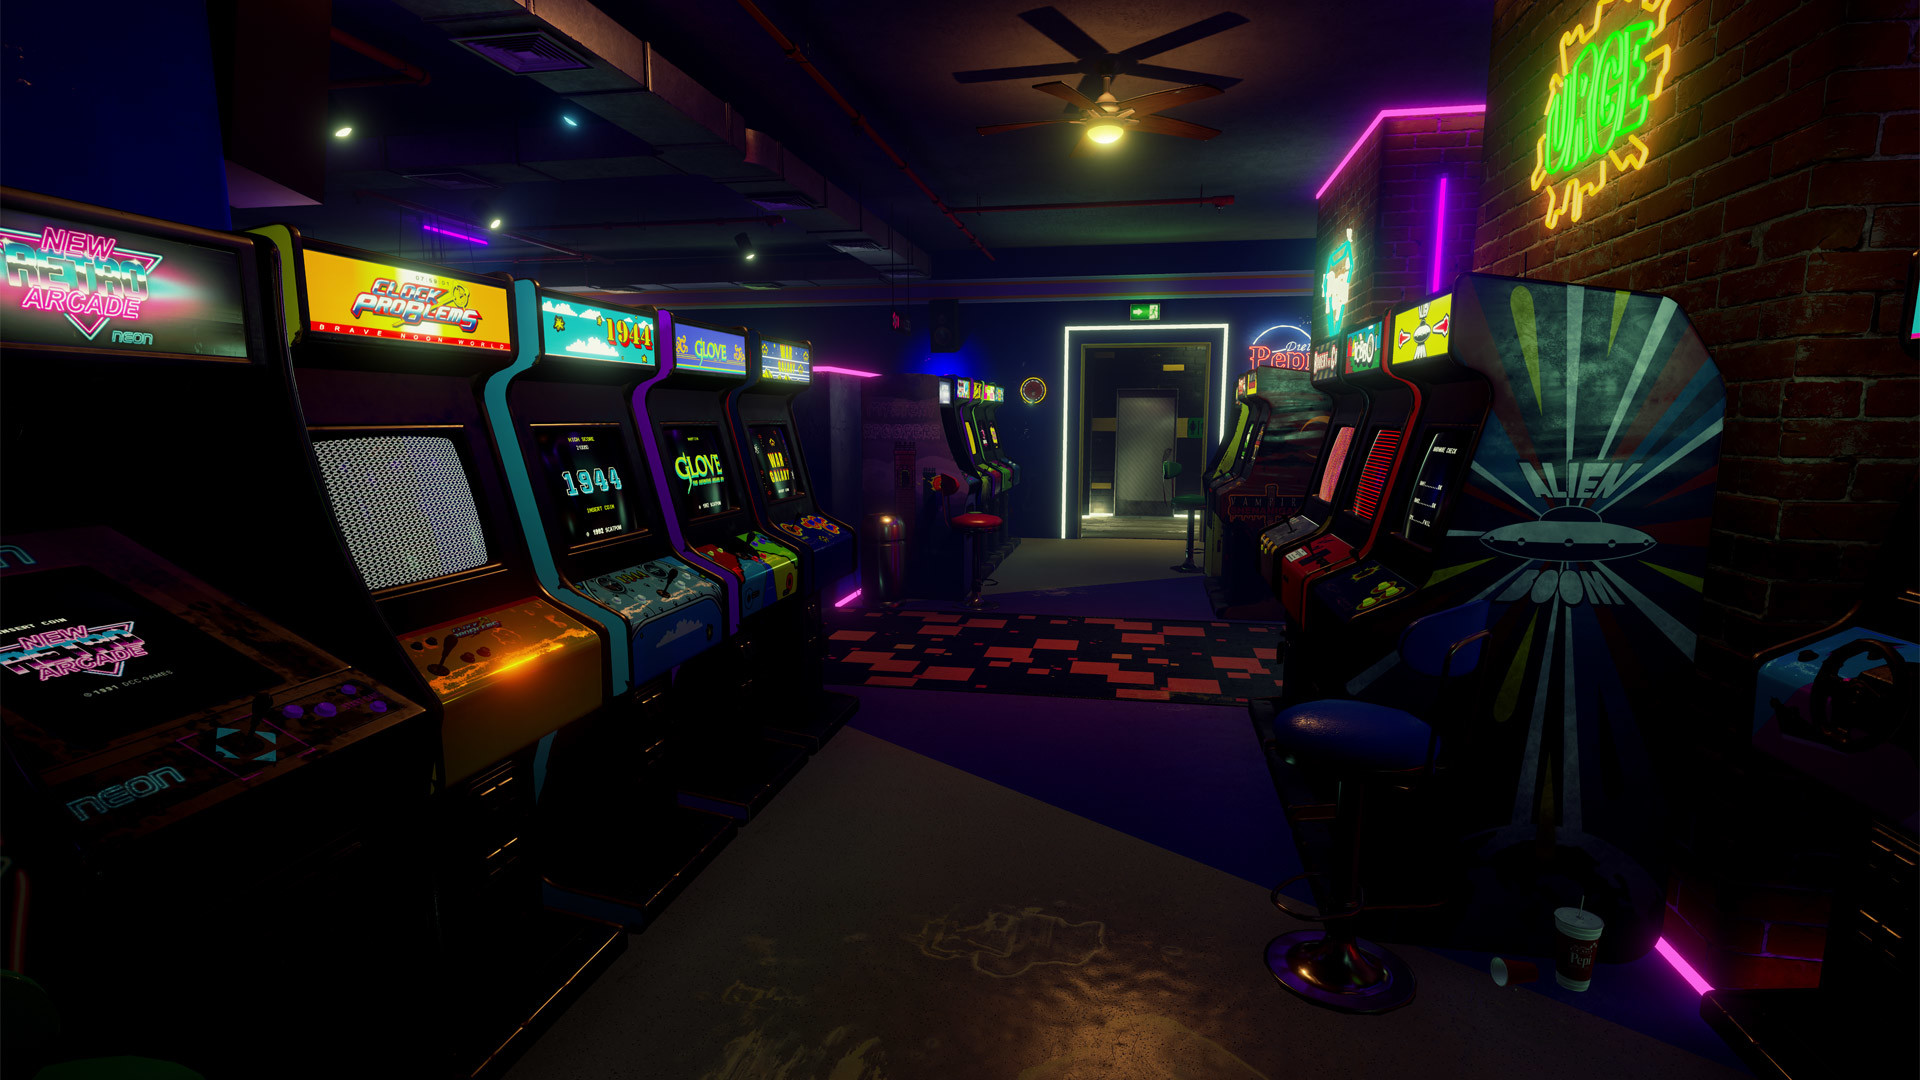 1920x1080 New Retro Arcade Neon's new arcade room is larger than the original and now  multi-level, with several back rooms hiding even more fun beyond the main  arcade ...